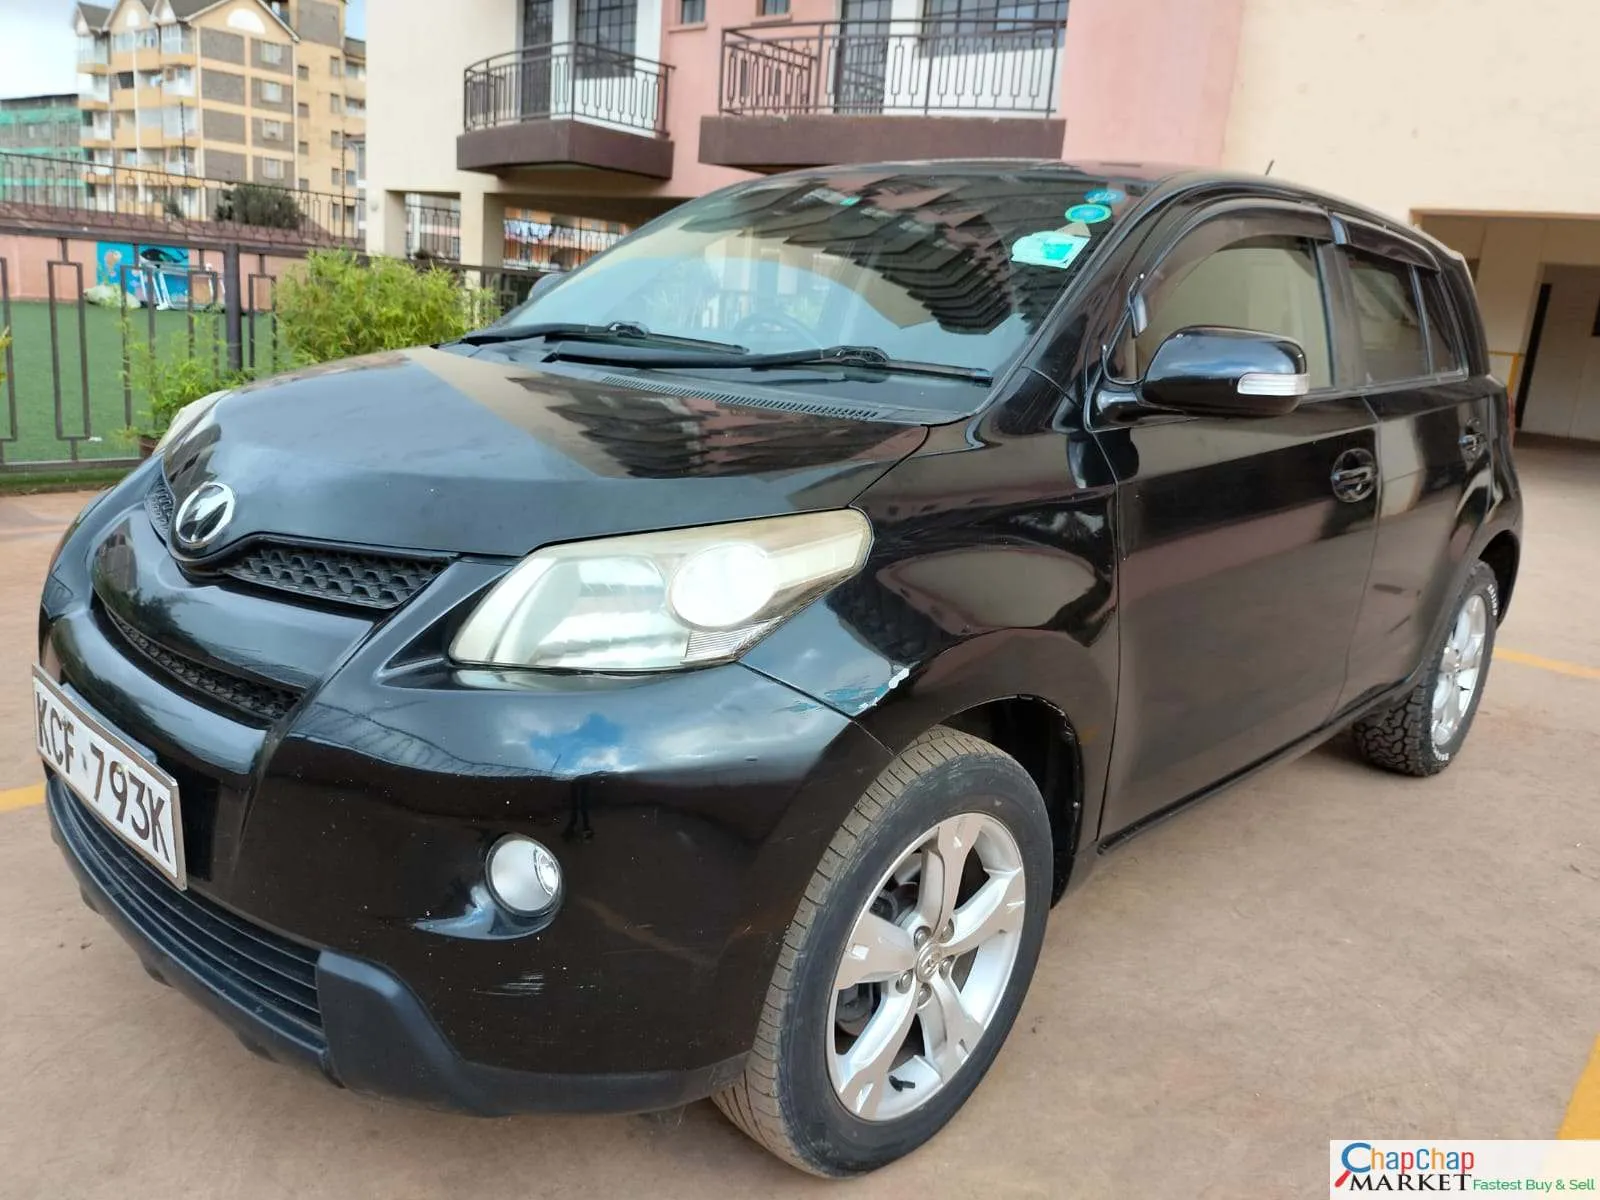 Toyota IST for sale in kenya hire purchase installments You Pay 30% Deposit Trade in OK EXCLUSIVE